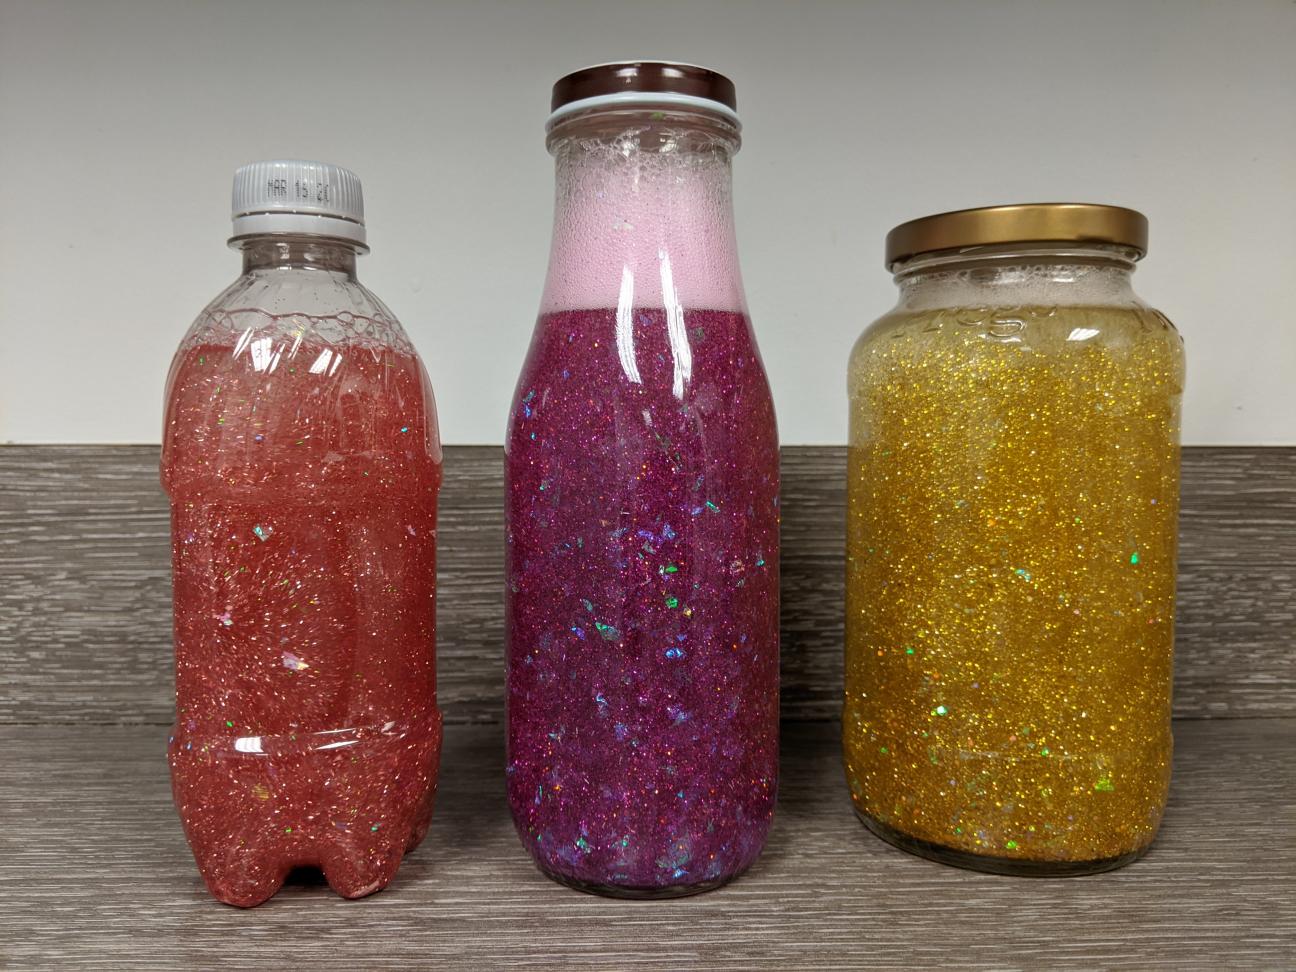 3 calming glitter jars: a small pink one, a larger pink one, and a medium gold one.